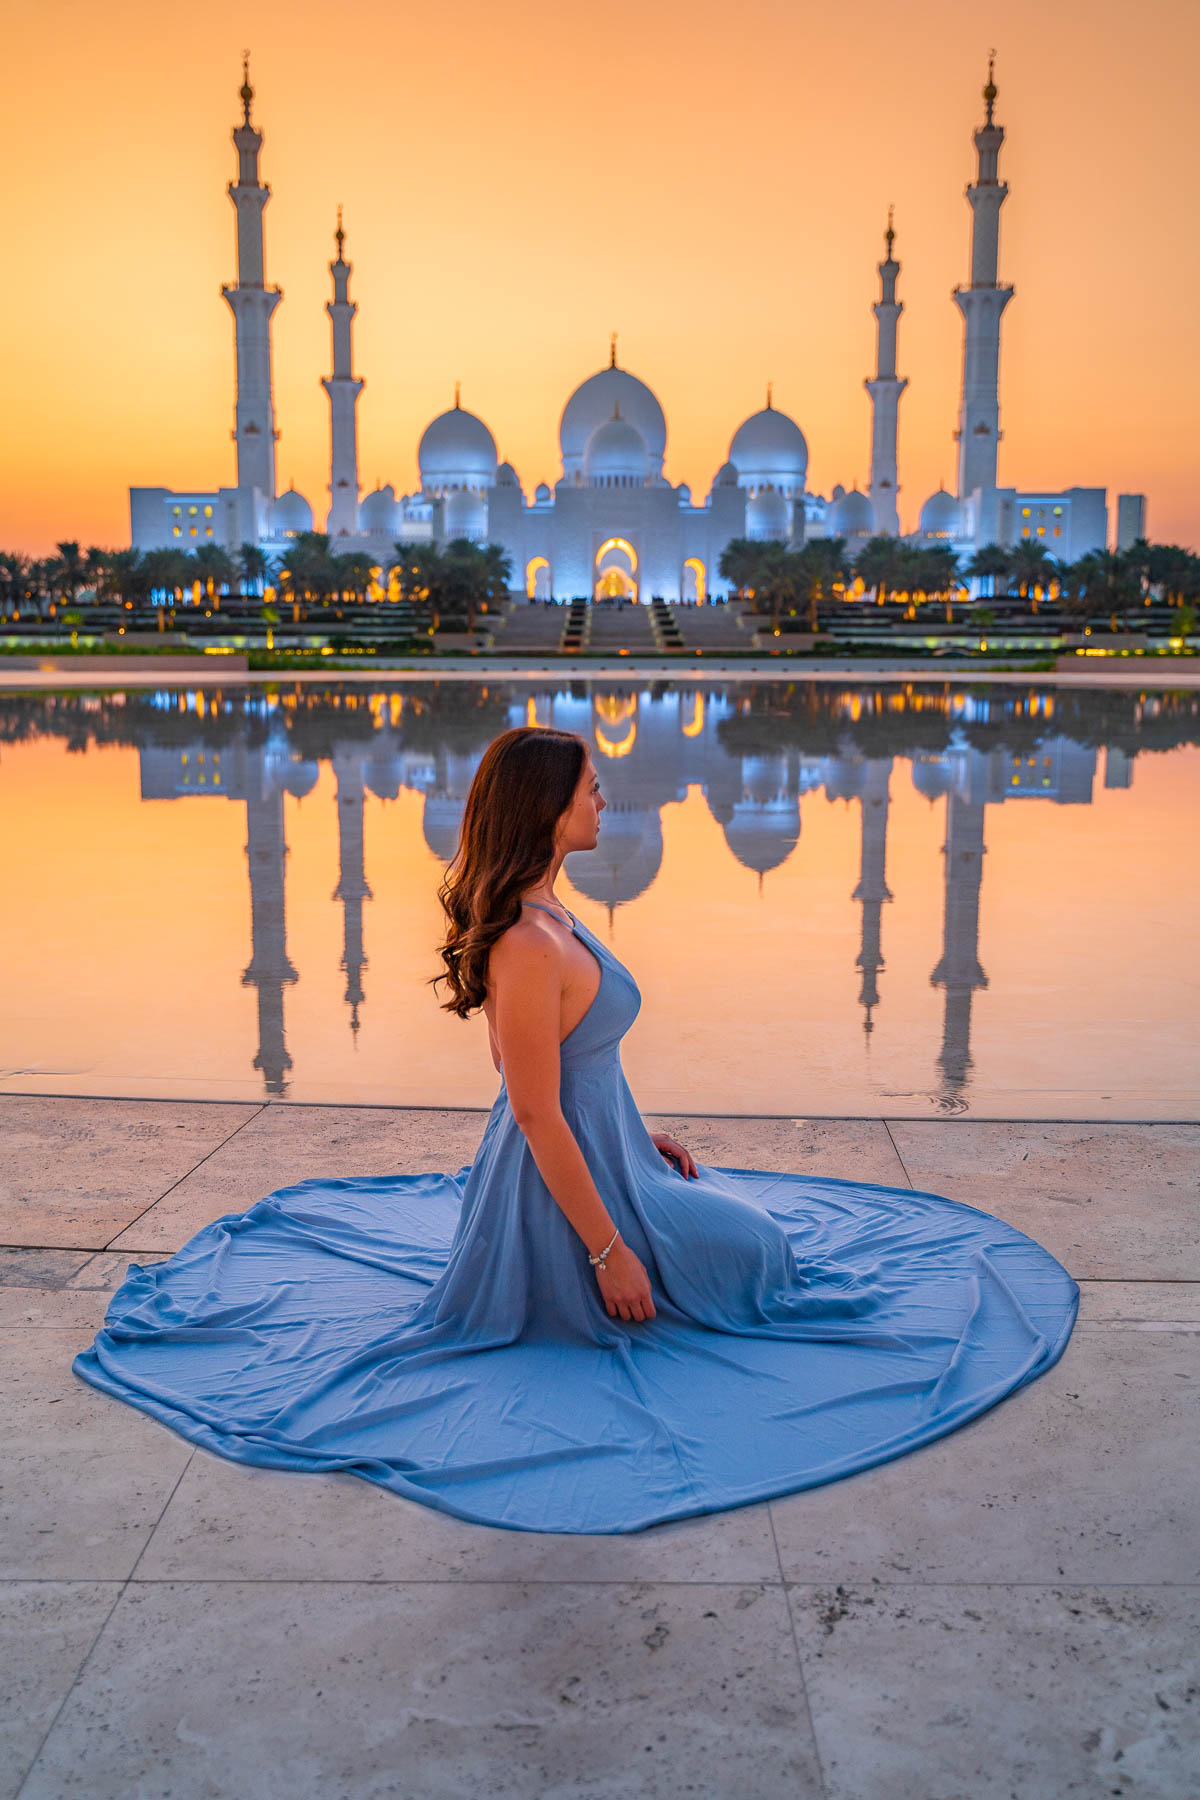 View of the Sheikh Zayed Grand Mosque at sunset from Wahat al Karama, one of the best Instagram spots in Abu Dhabi